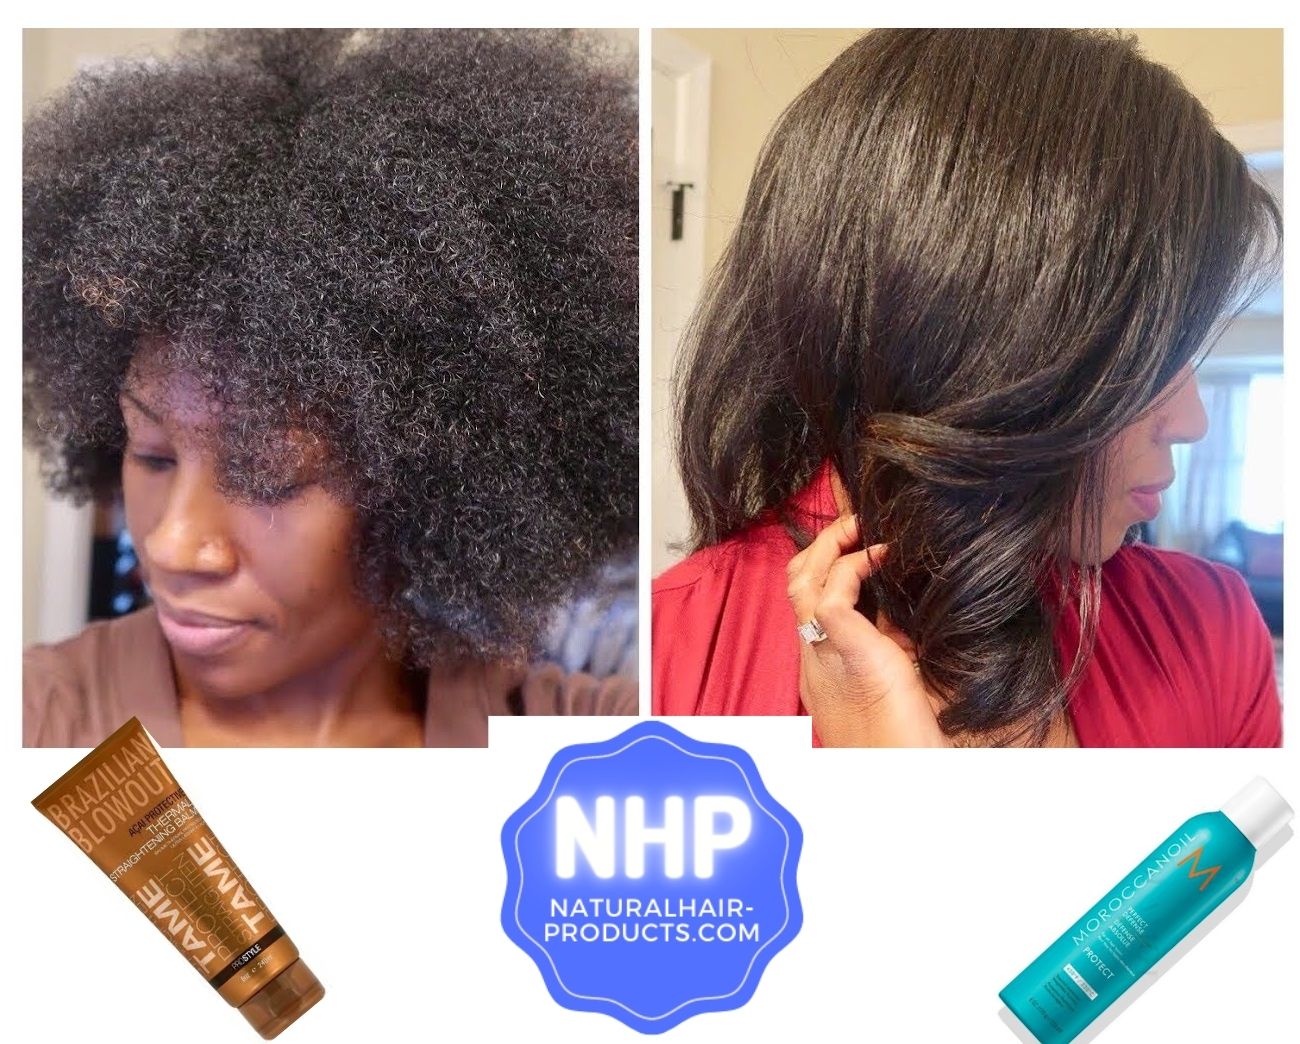 Babyliss pro 4c hair reviews Best Protectant Products to Flat Iron 4C Hair - Serums, Sprays & Balms